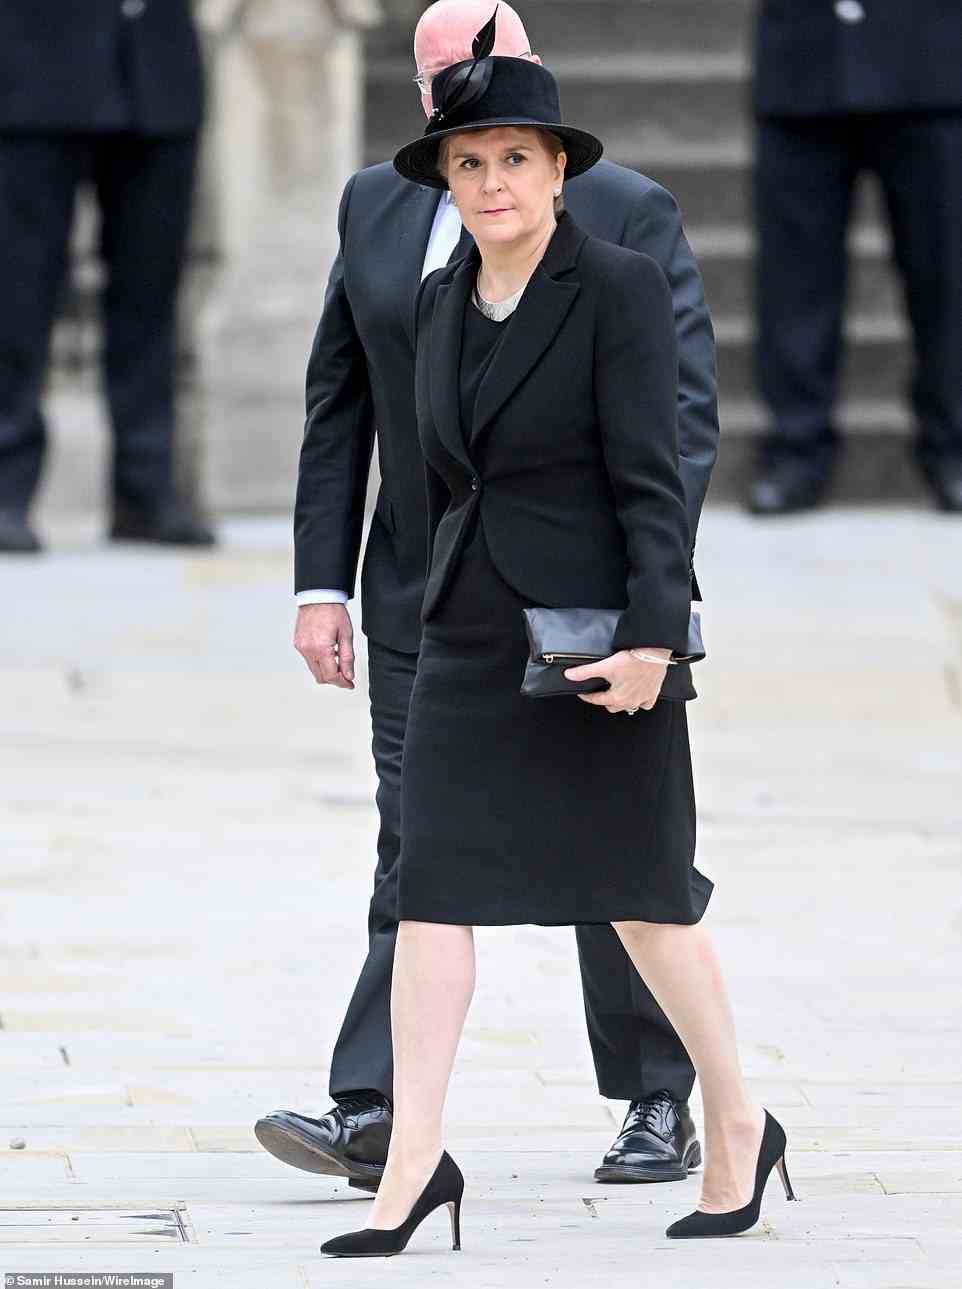 Scottish First Minister Nicola Sturgeon arrives for the state funeral of Queen Elizabeth II at Westminster Abbey today